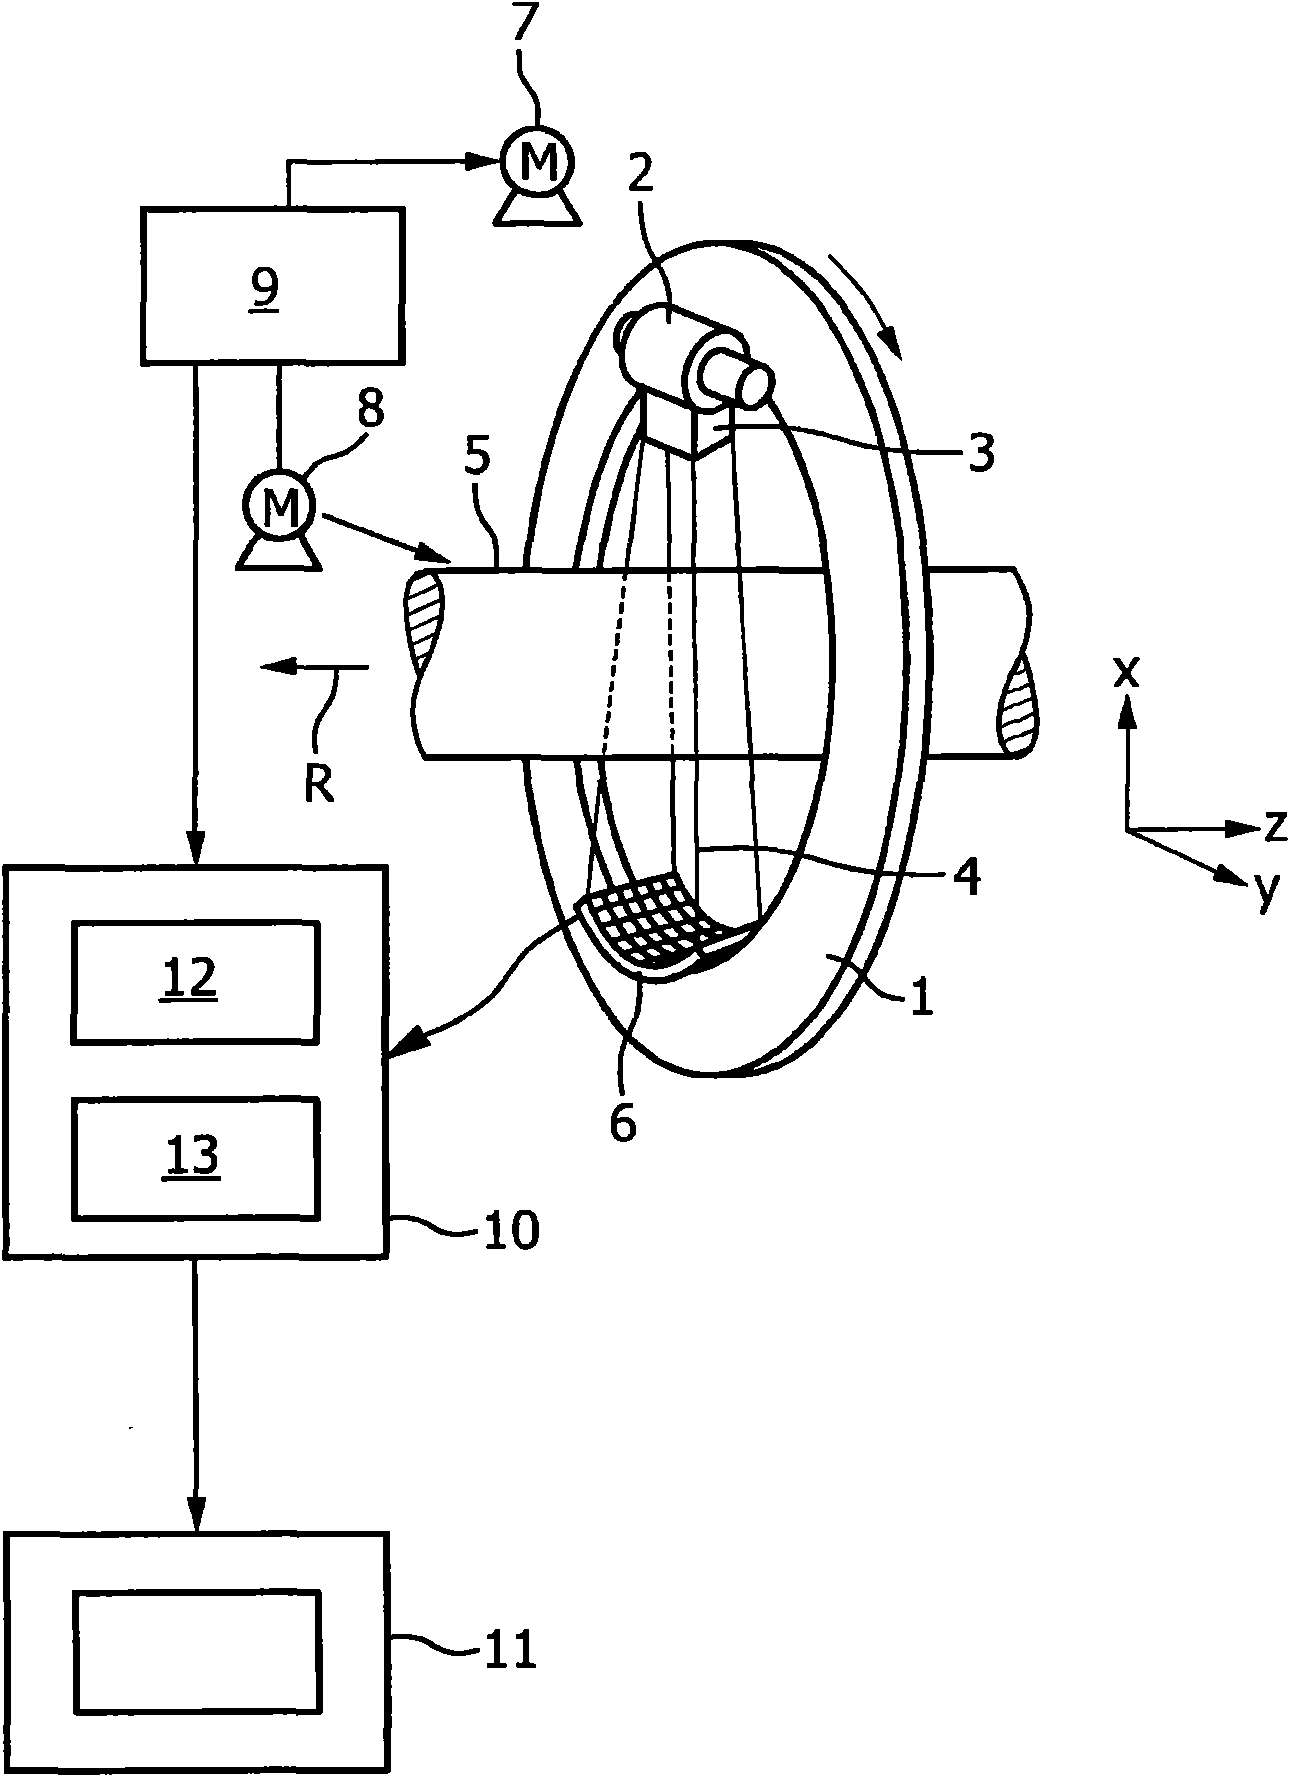 Imaging system for imaging an object